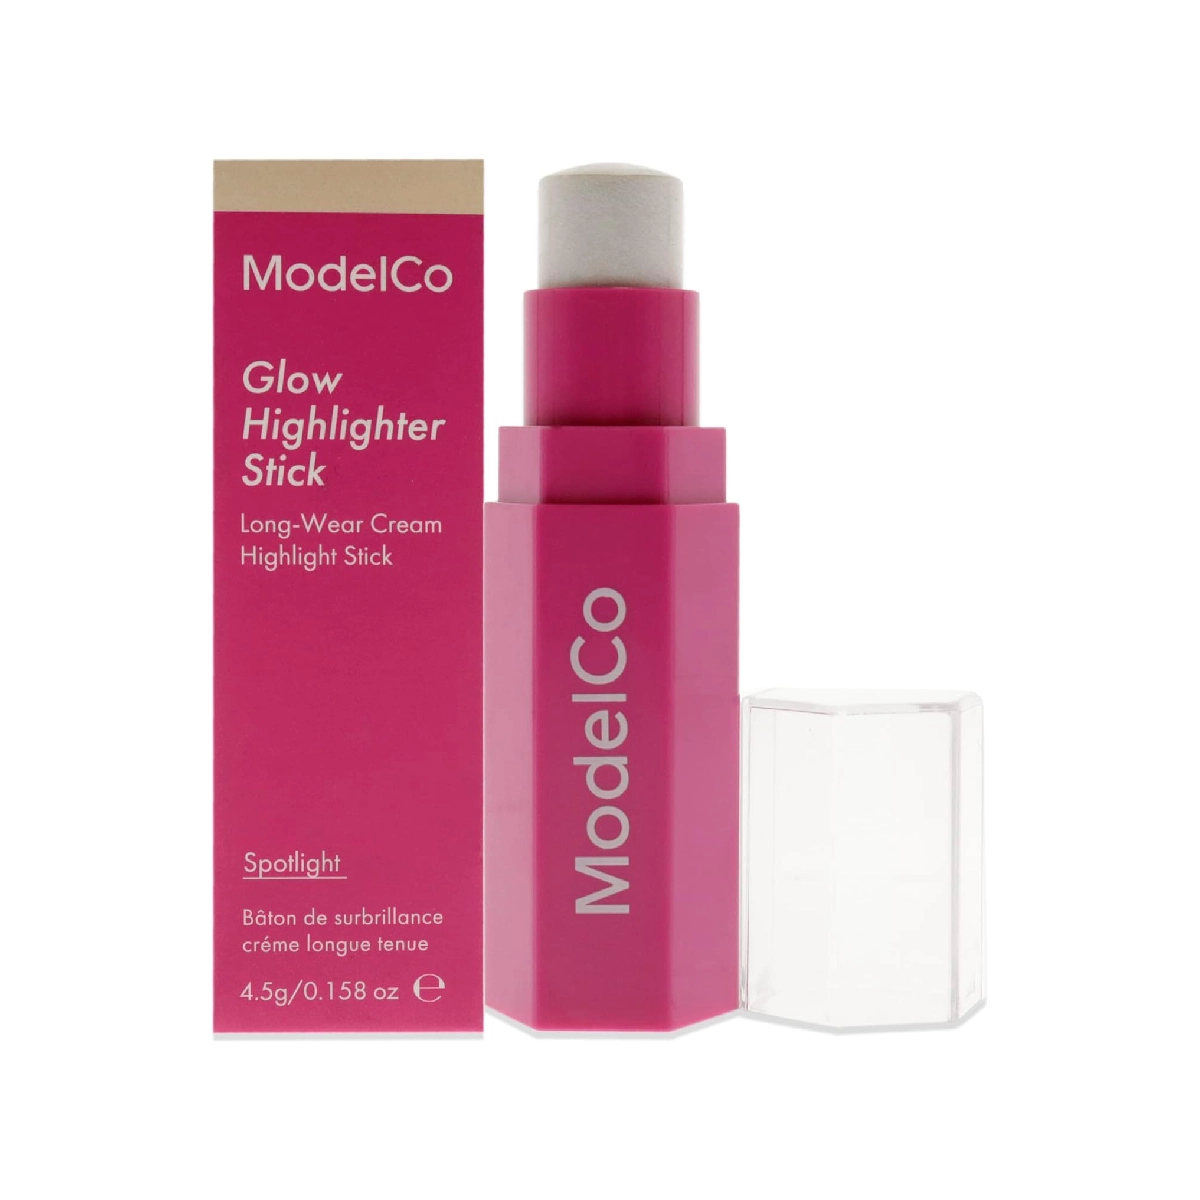 ModelCo Glow Highlighter Stick - Highlighter stick on a white background